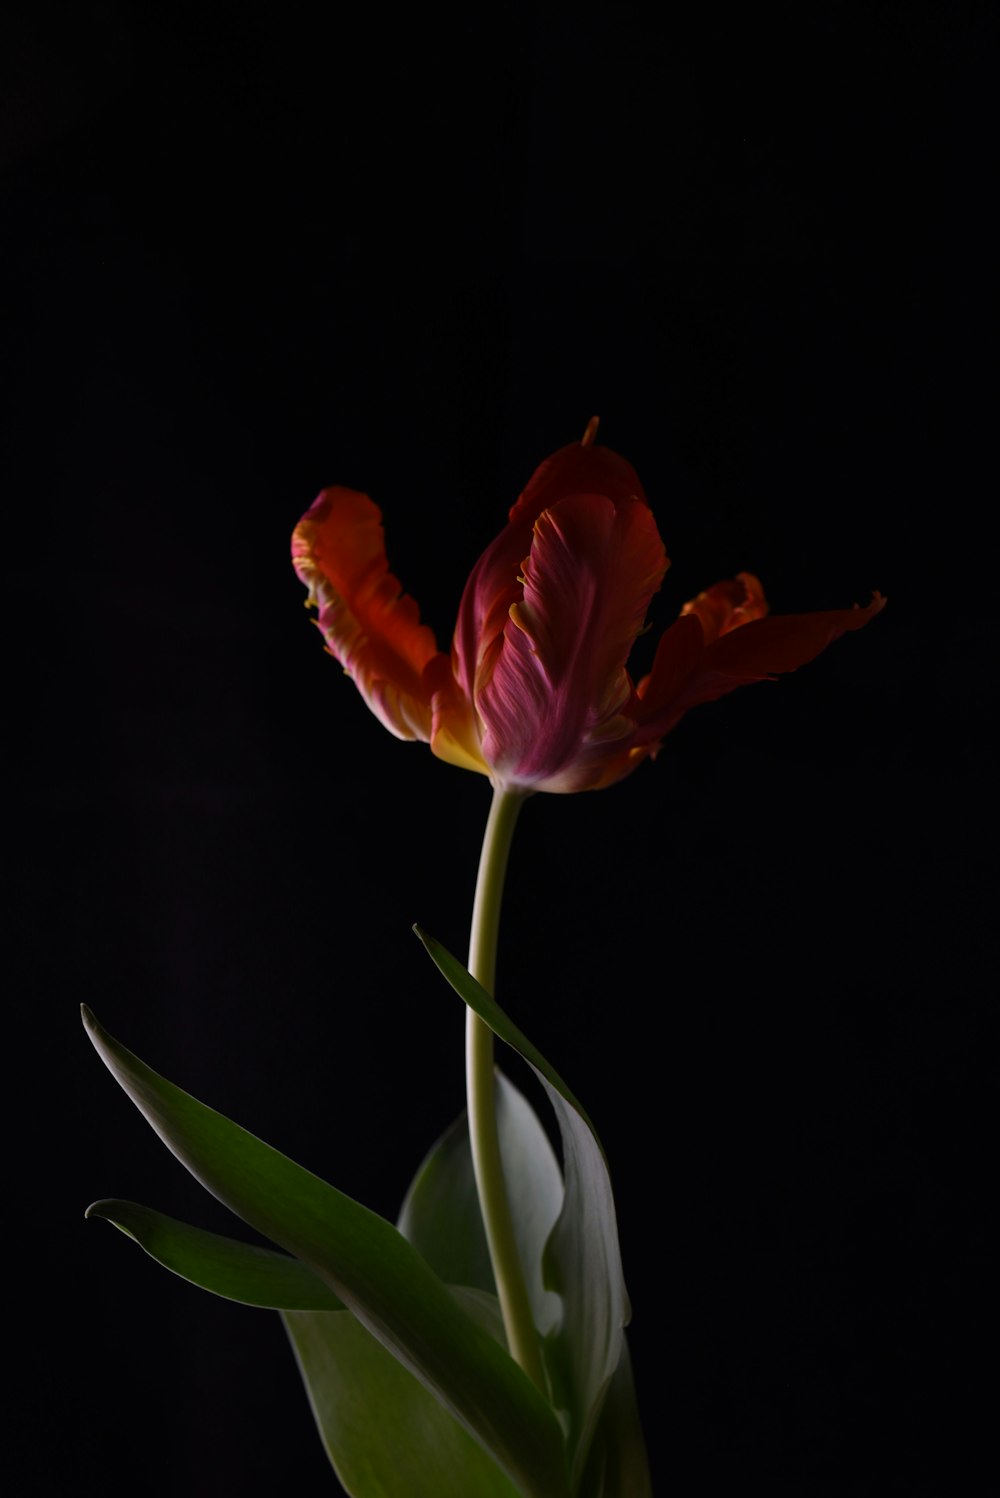 a single red flower in a vase on a black background